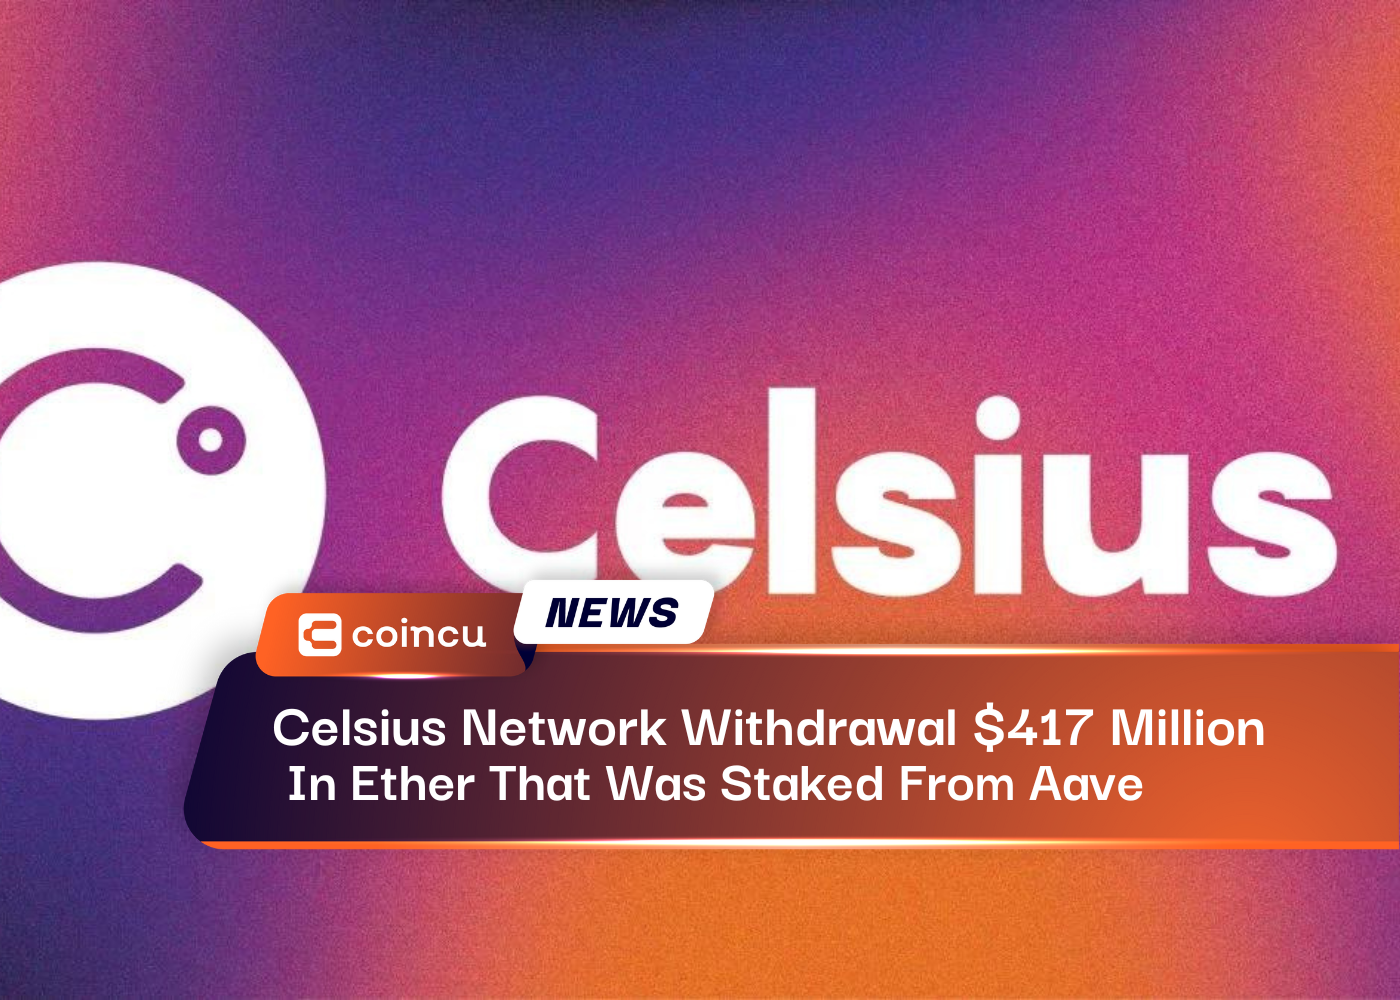 Celsius Network Withdrawal 417 Million